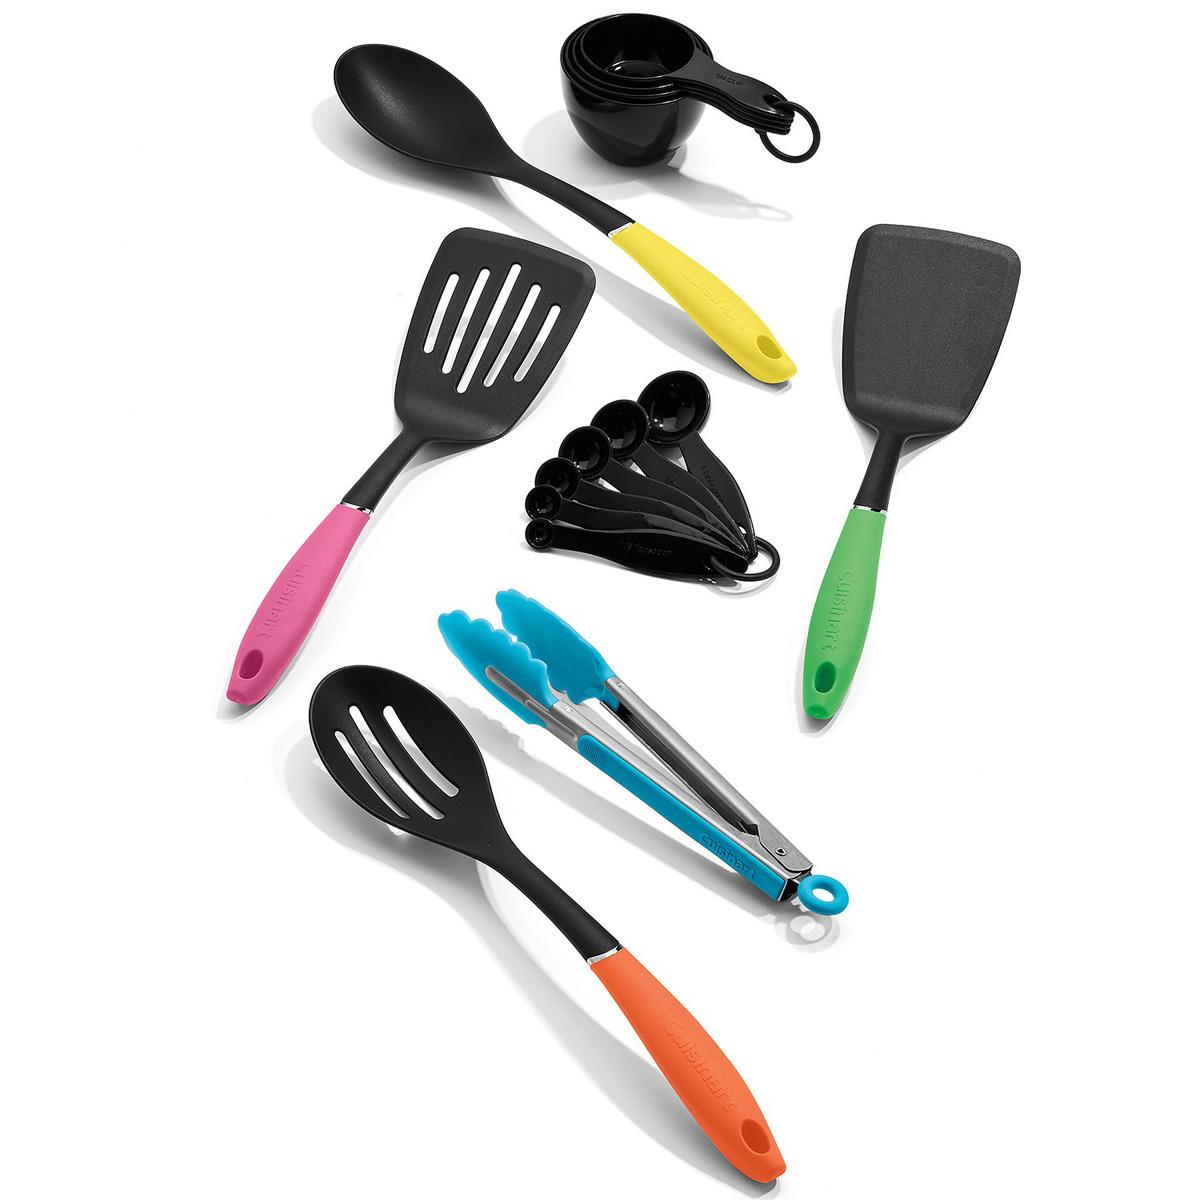 Cuisinart Curve 15 Piece Kitchen Tool Set for $14.99